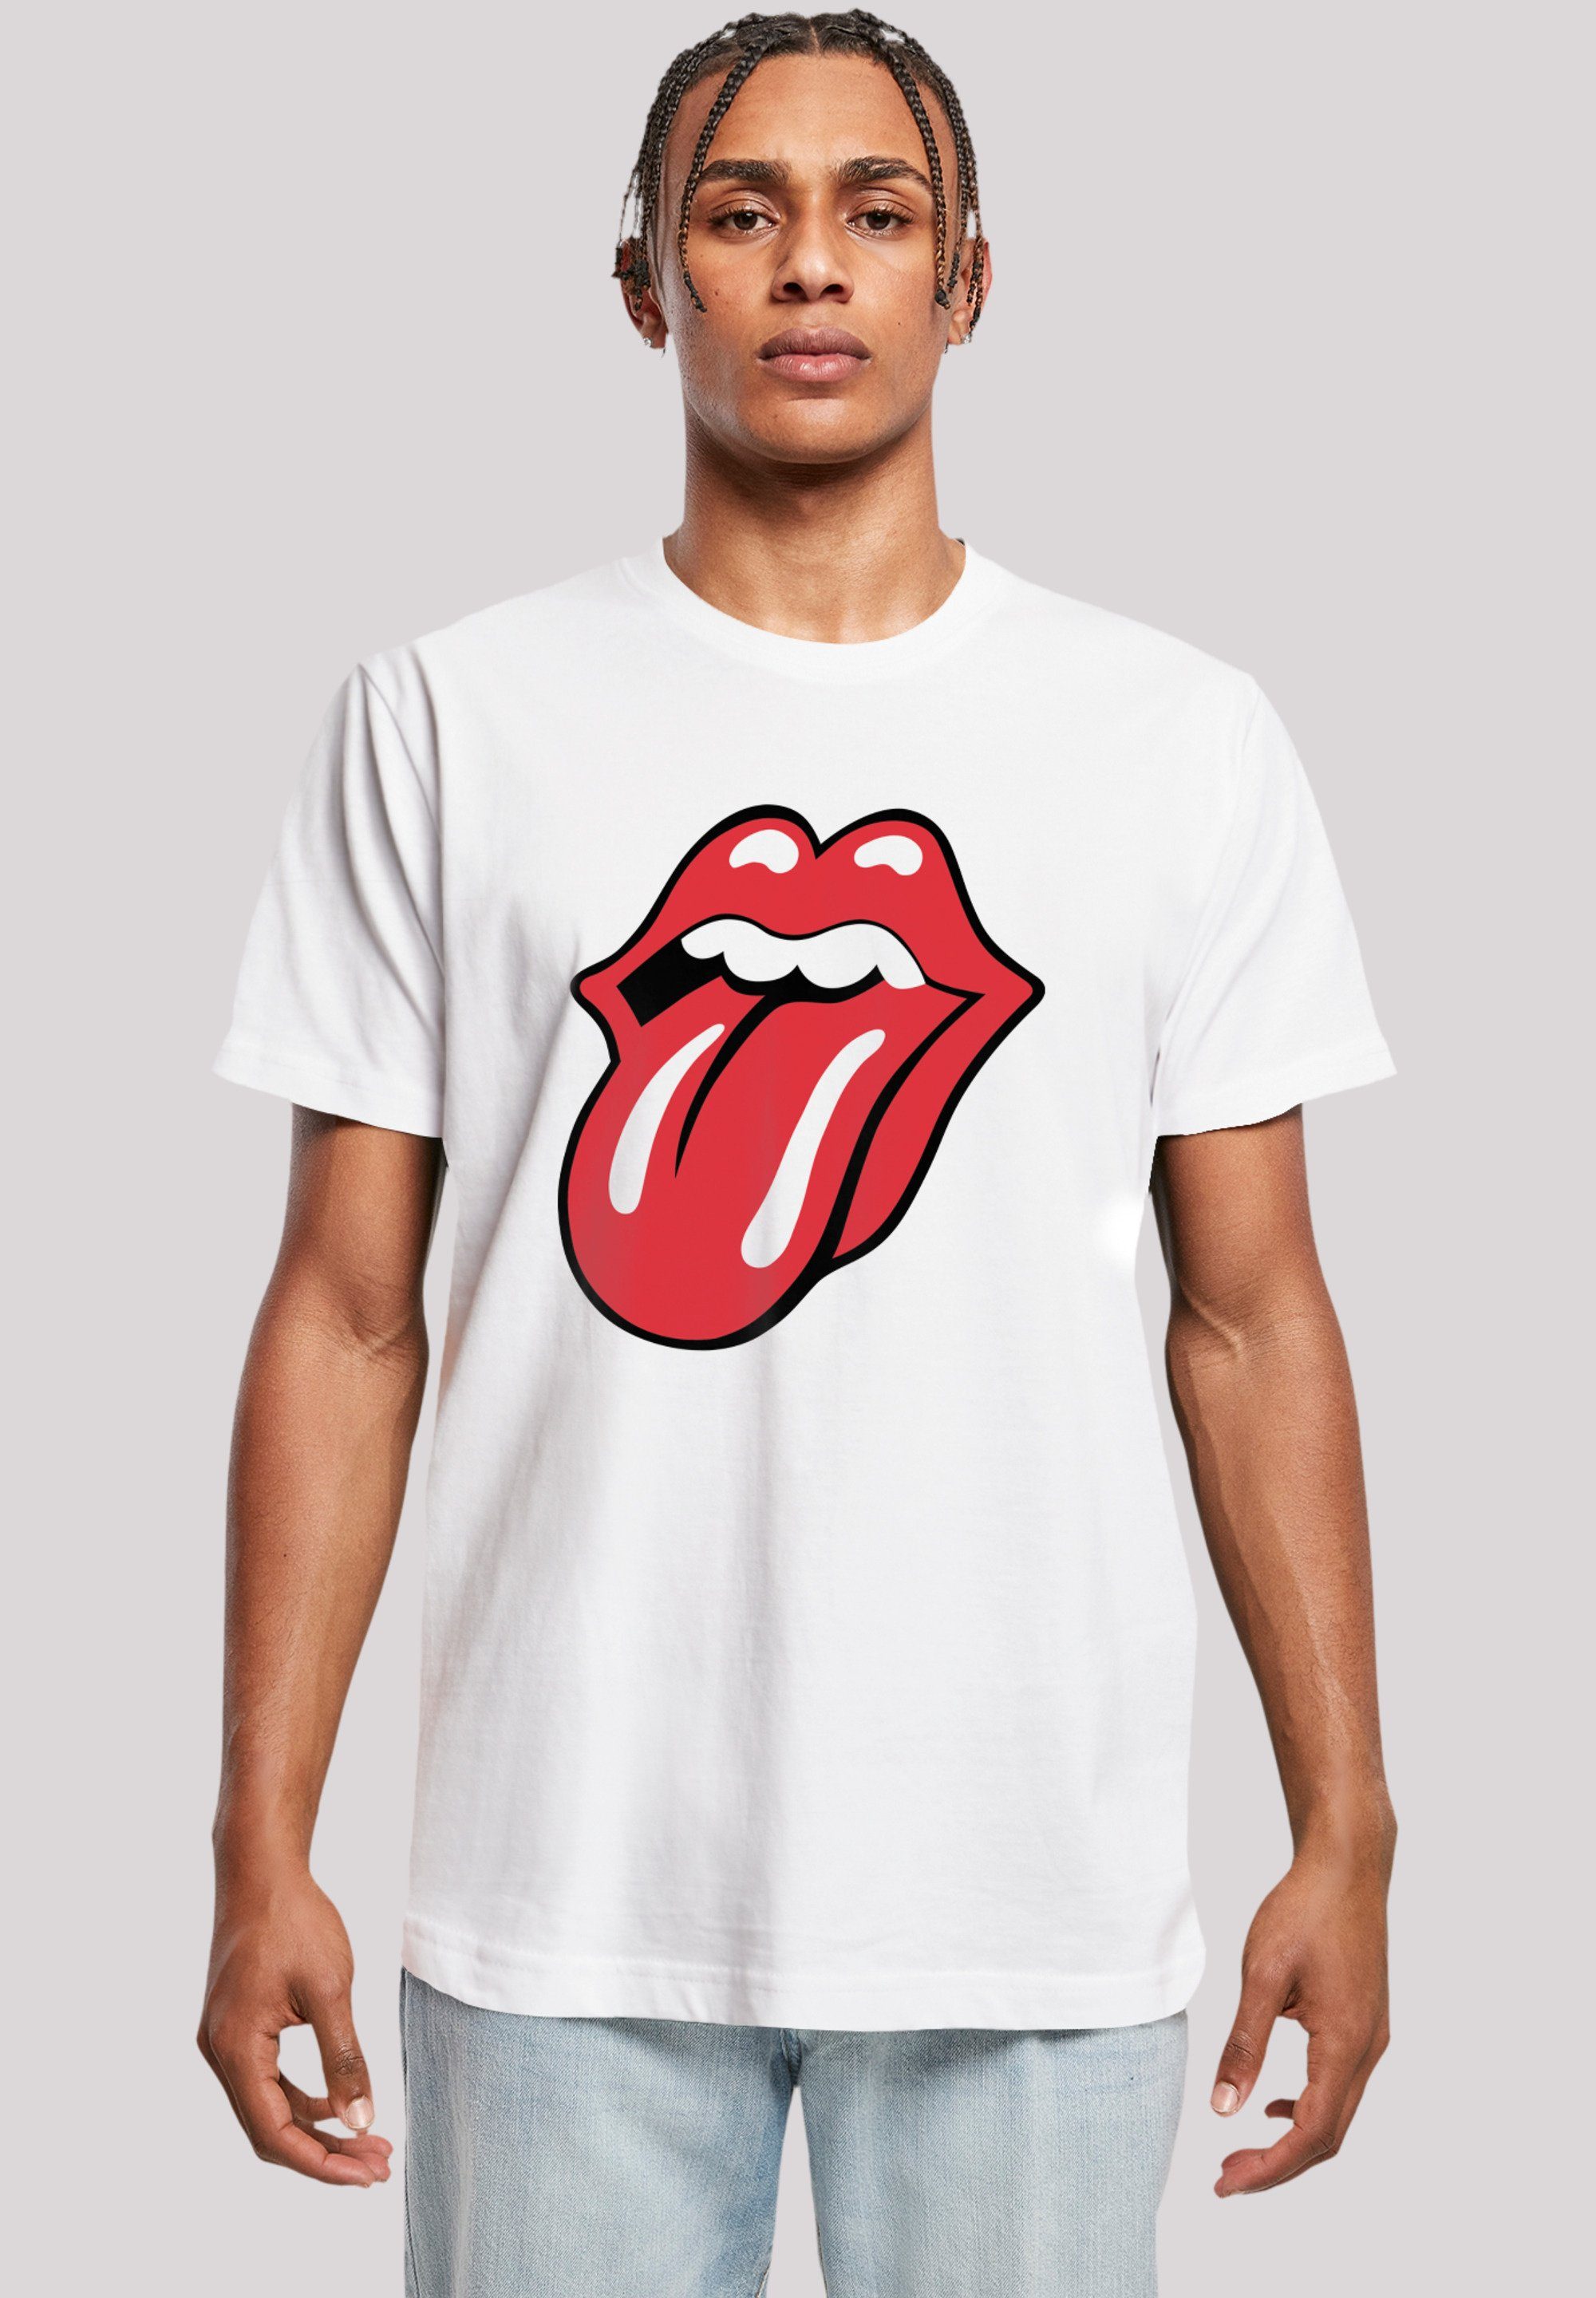 F4NT4STIC T-Shirt The Stones Print Rote Zunge Rolling weiß